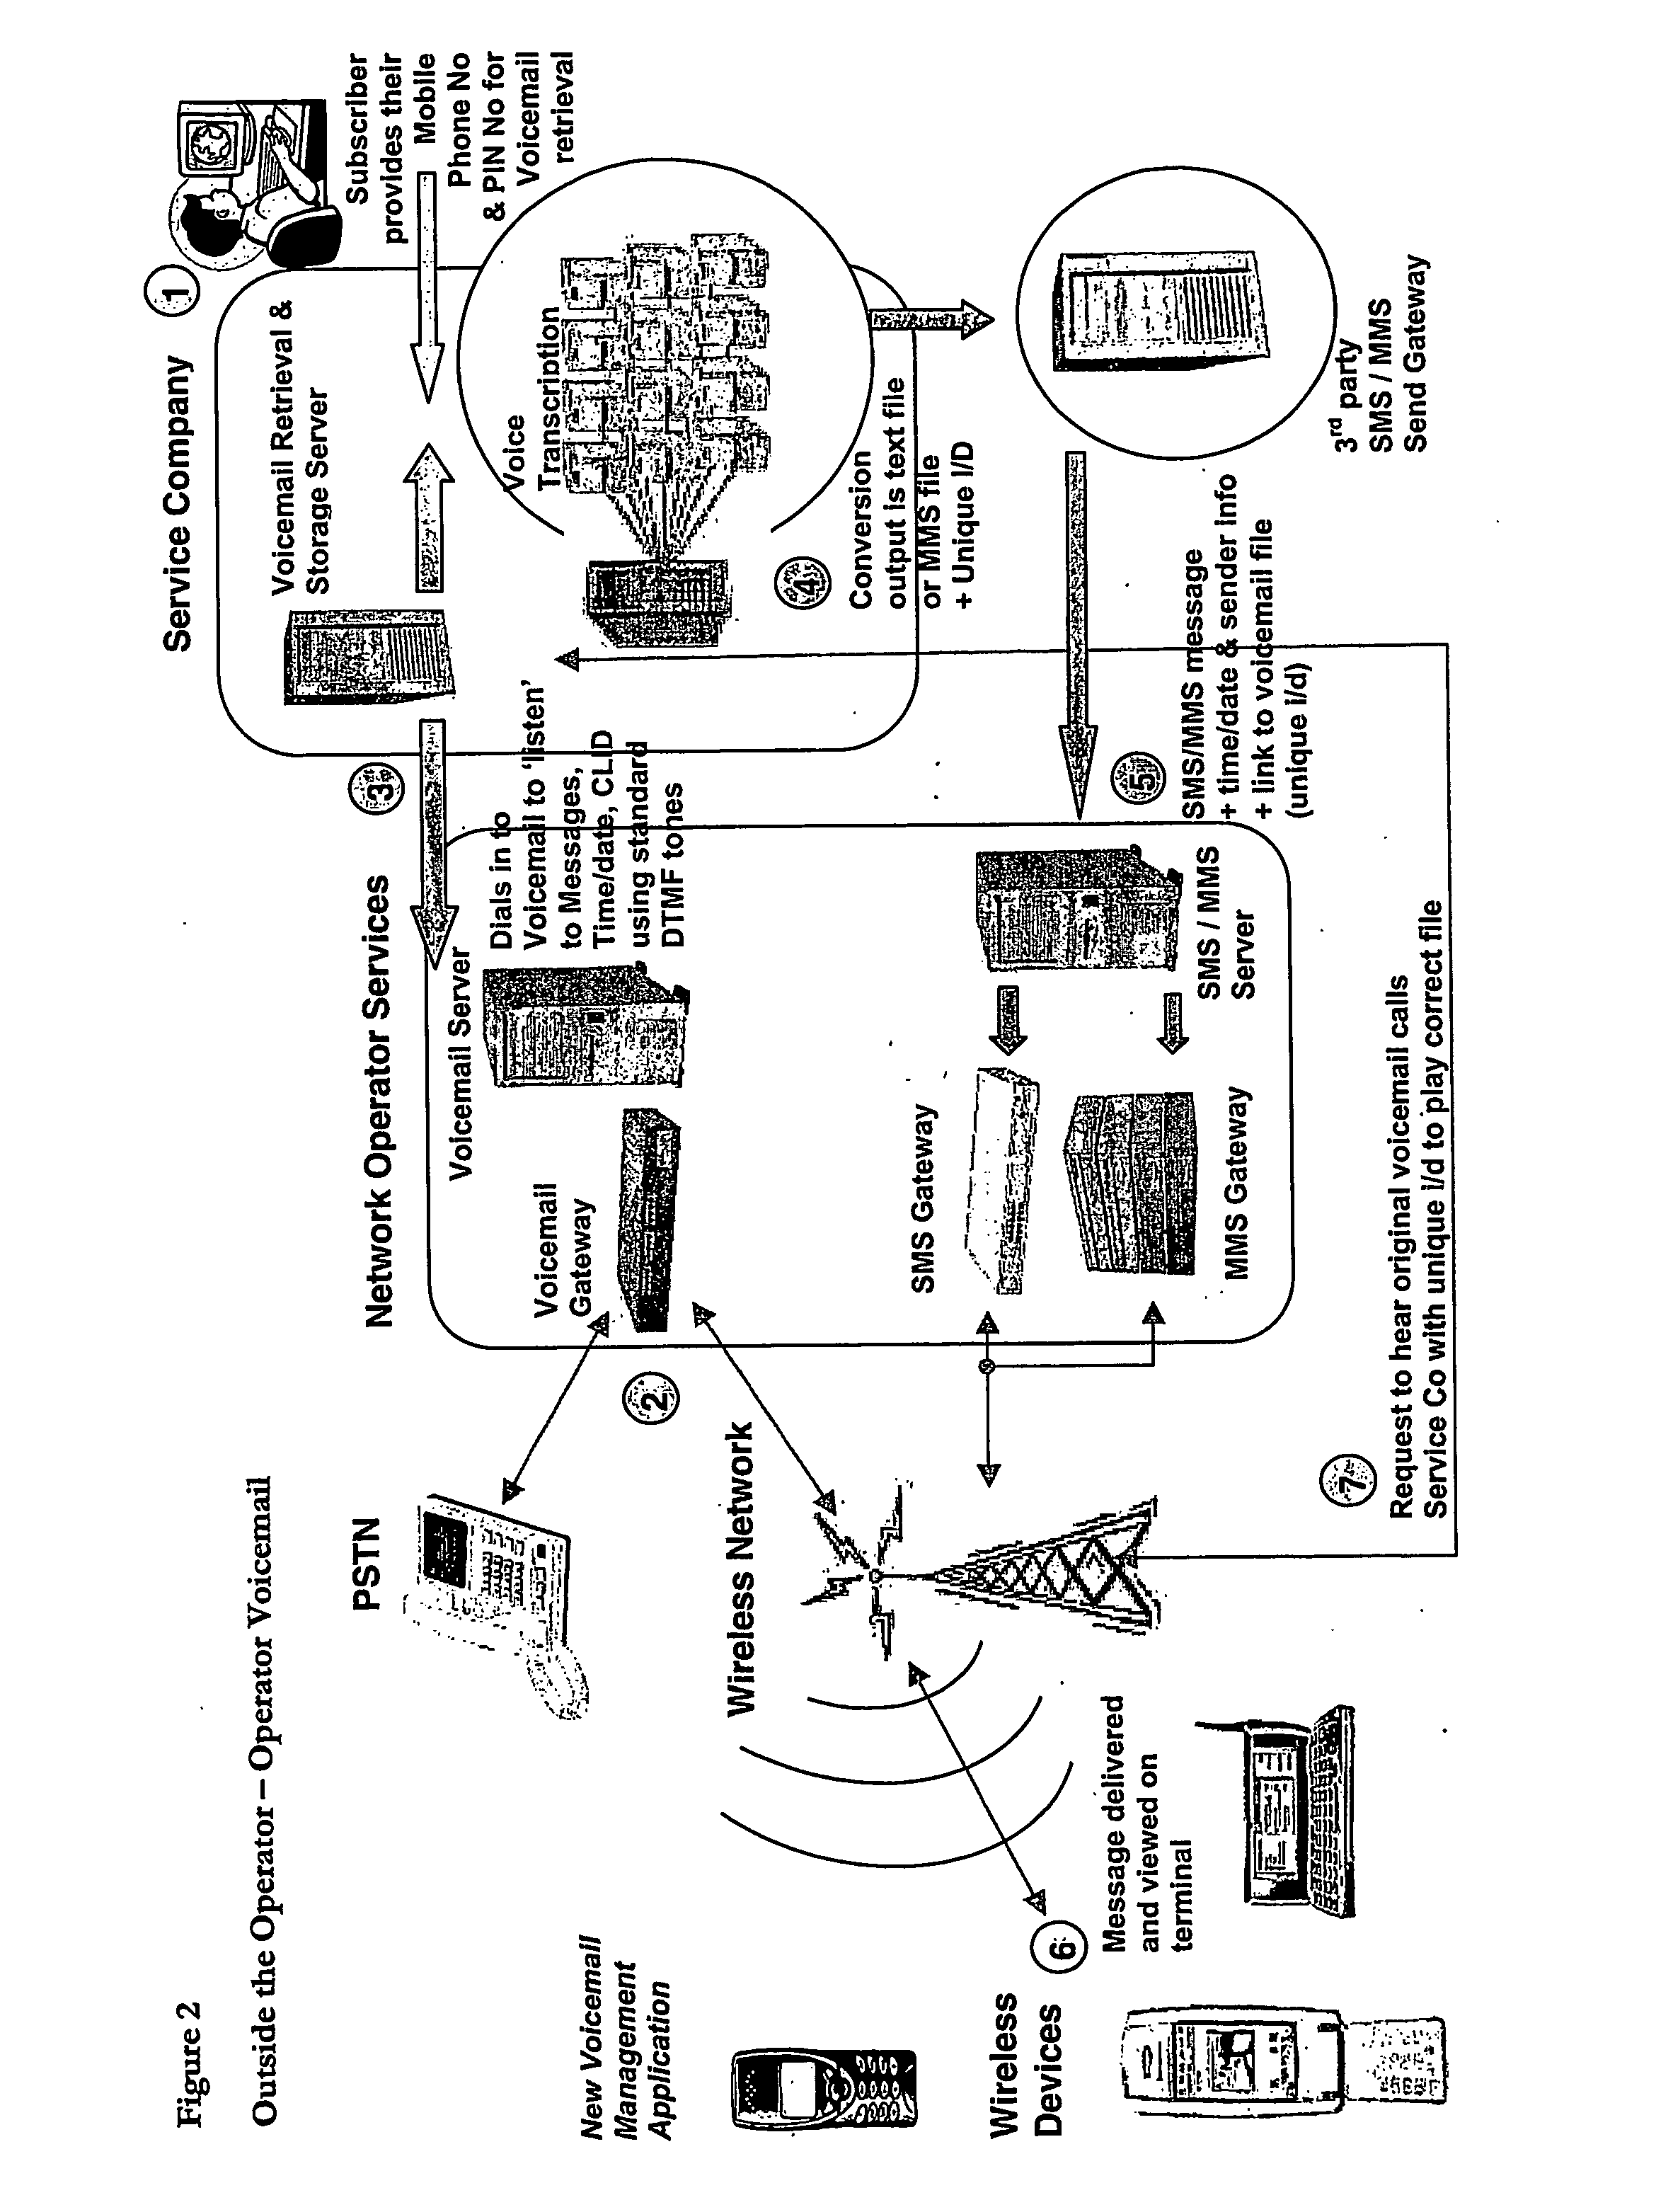 Method of providing voicemails to a wireless information device